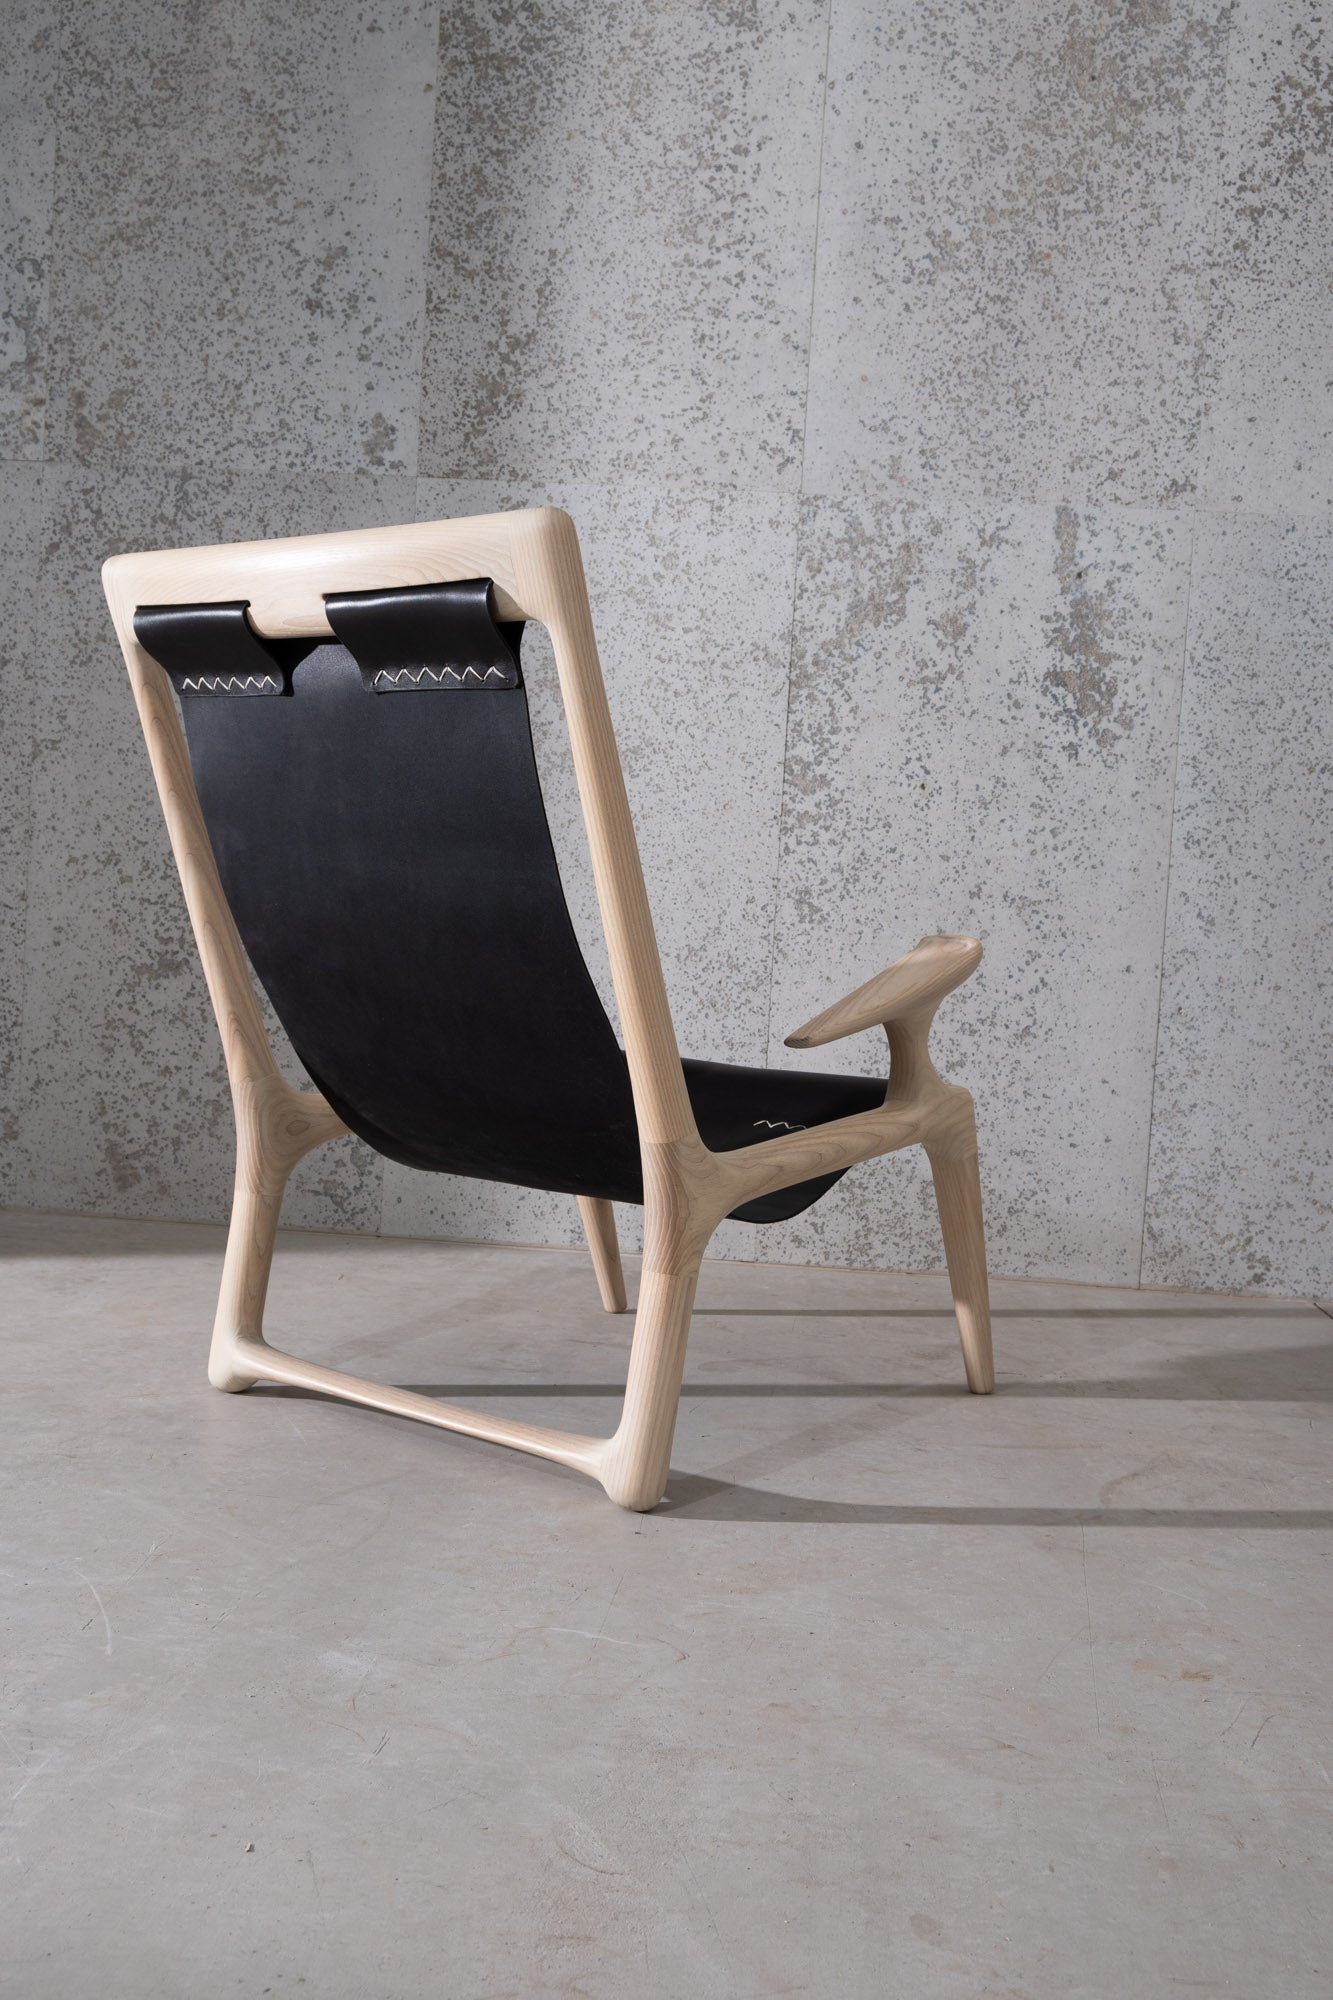 The Sling Chair